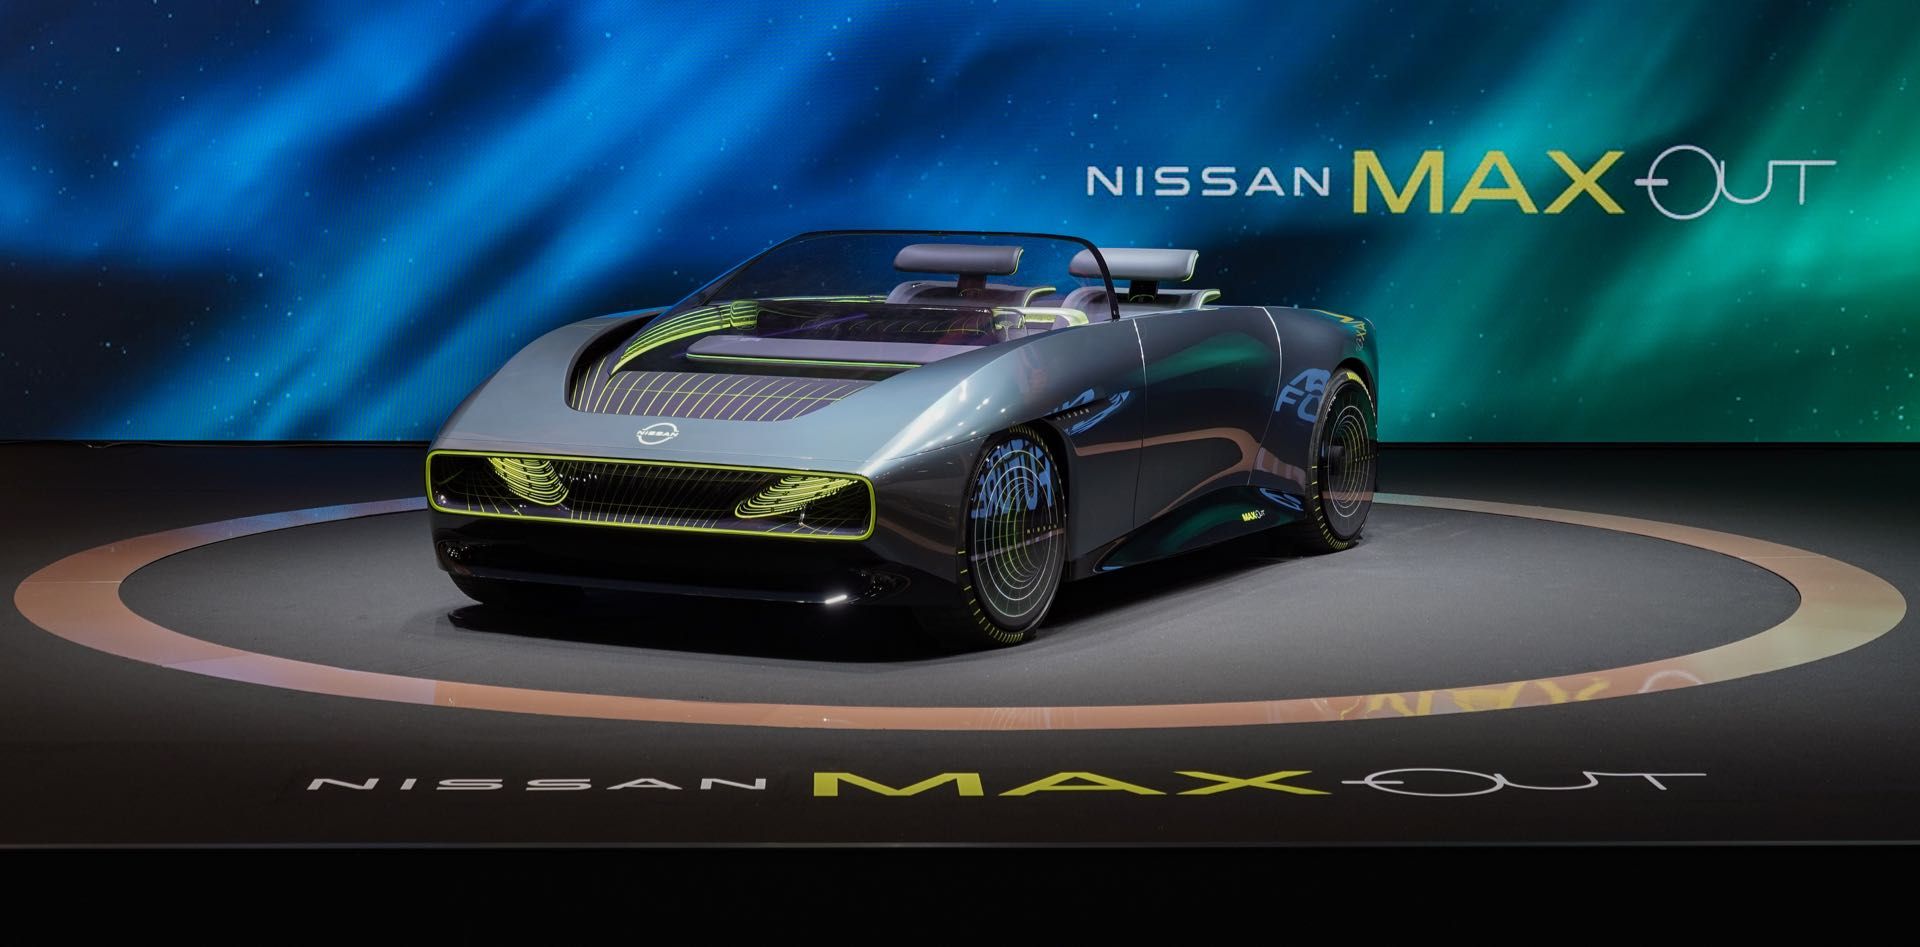 Nissan-Max-Out-concept-11.jpg